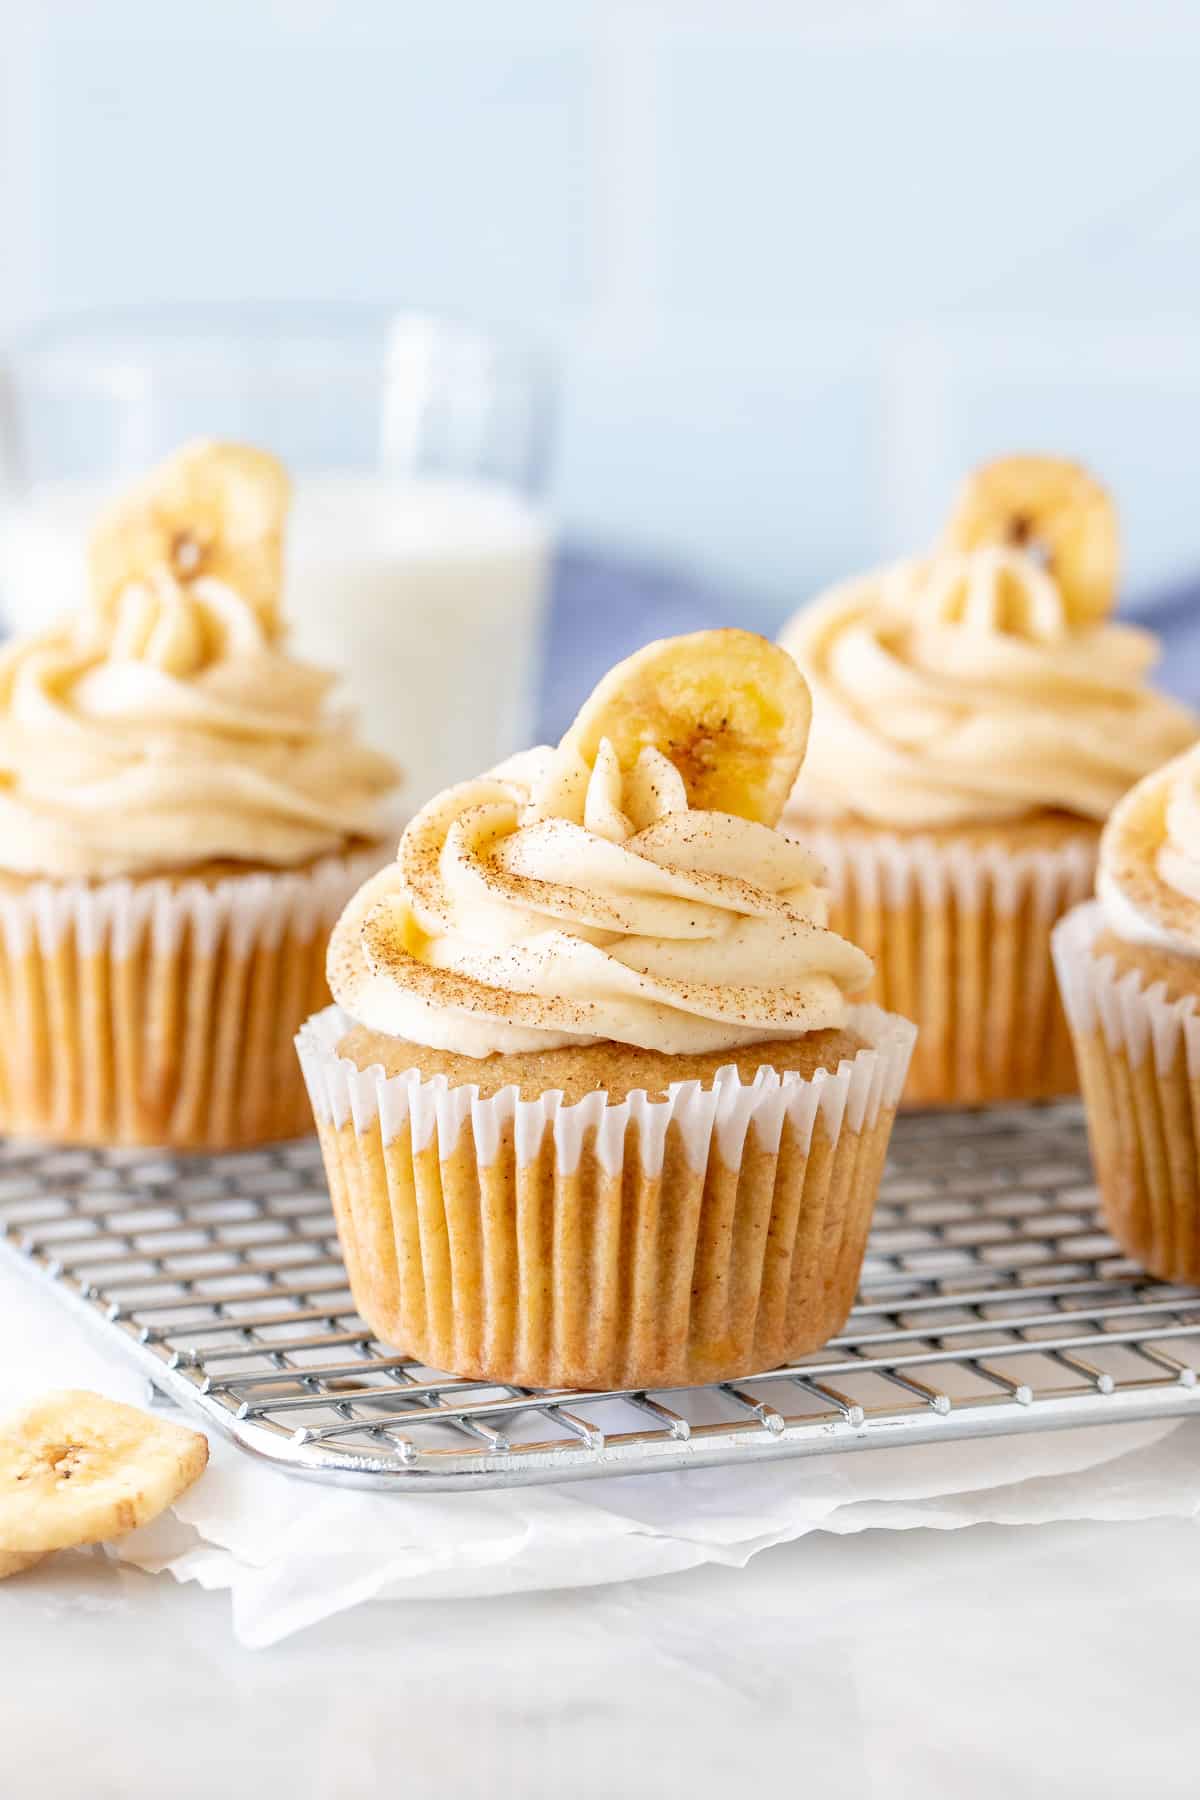 Banana cupcakes with cream cheese frosting on a cooling rack